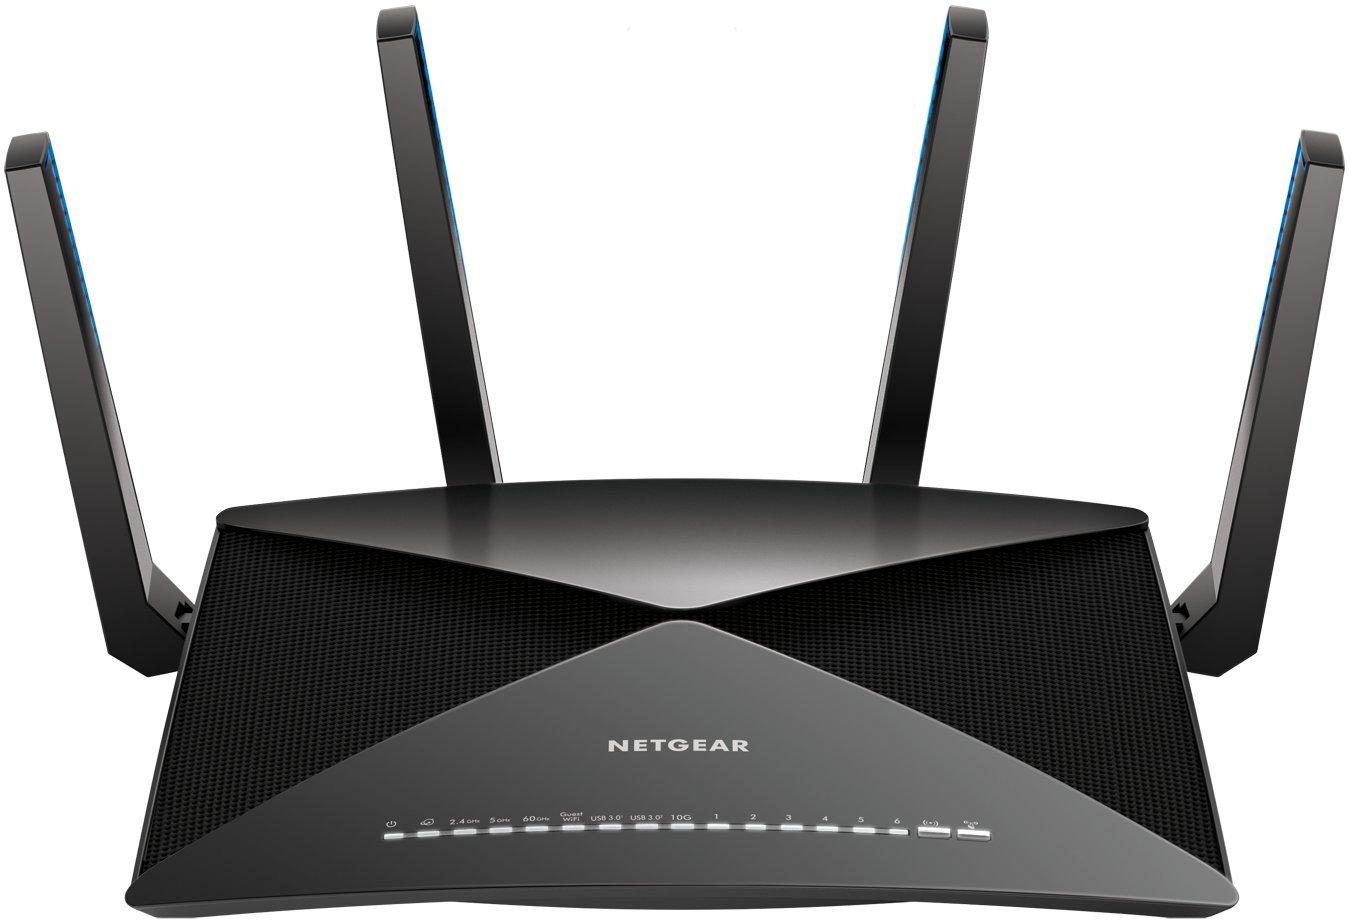 Roundup of black friday deals on netgear nighthawk routers